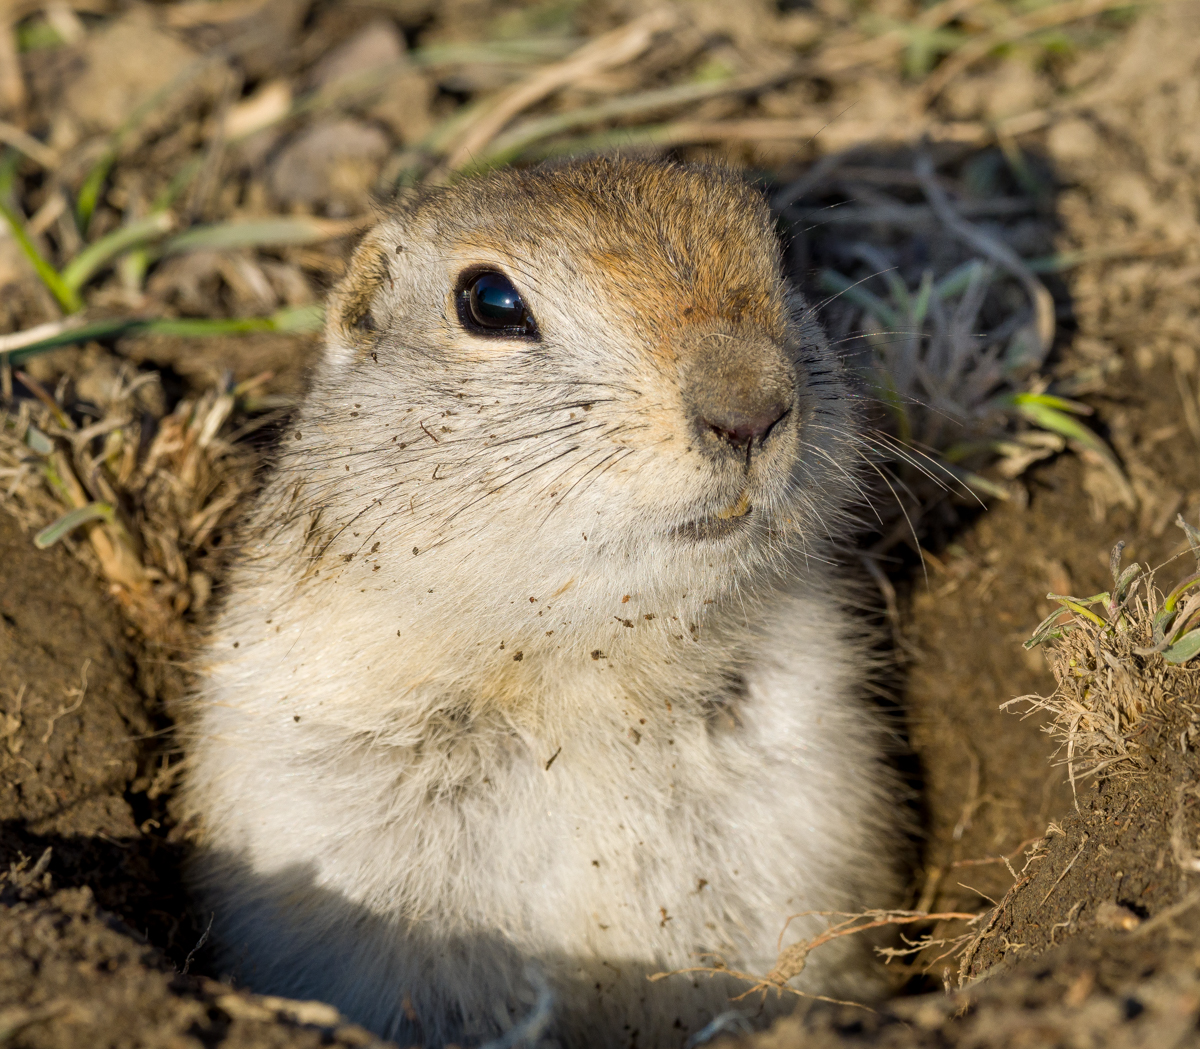 Spring cleaning gives you a dirty face if you are a Richardson's Ground Squirrel.